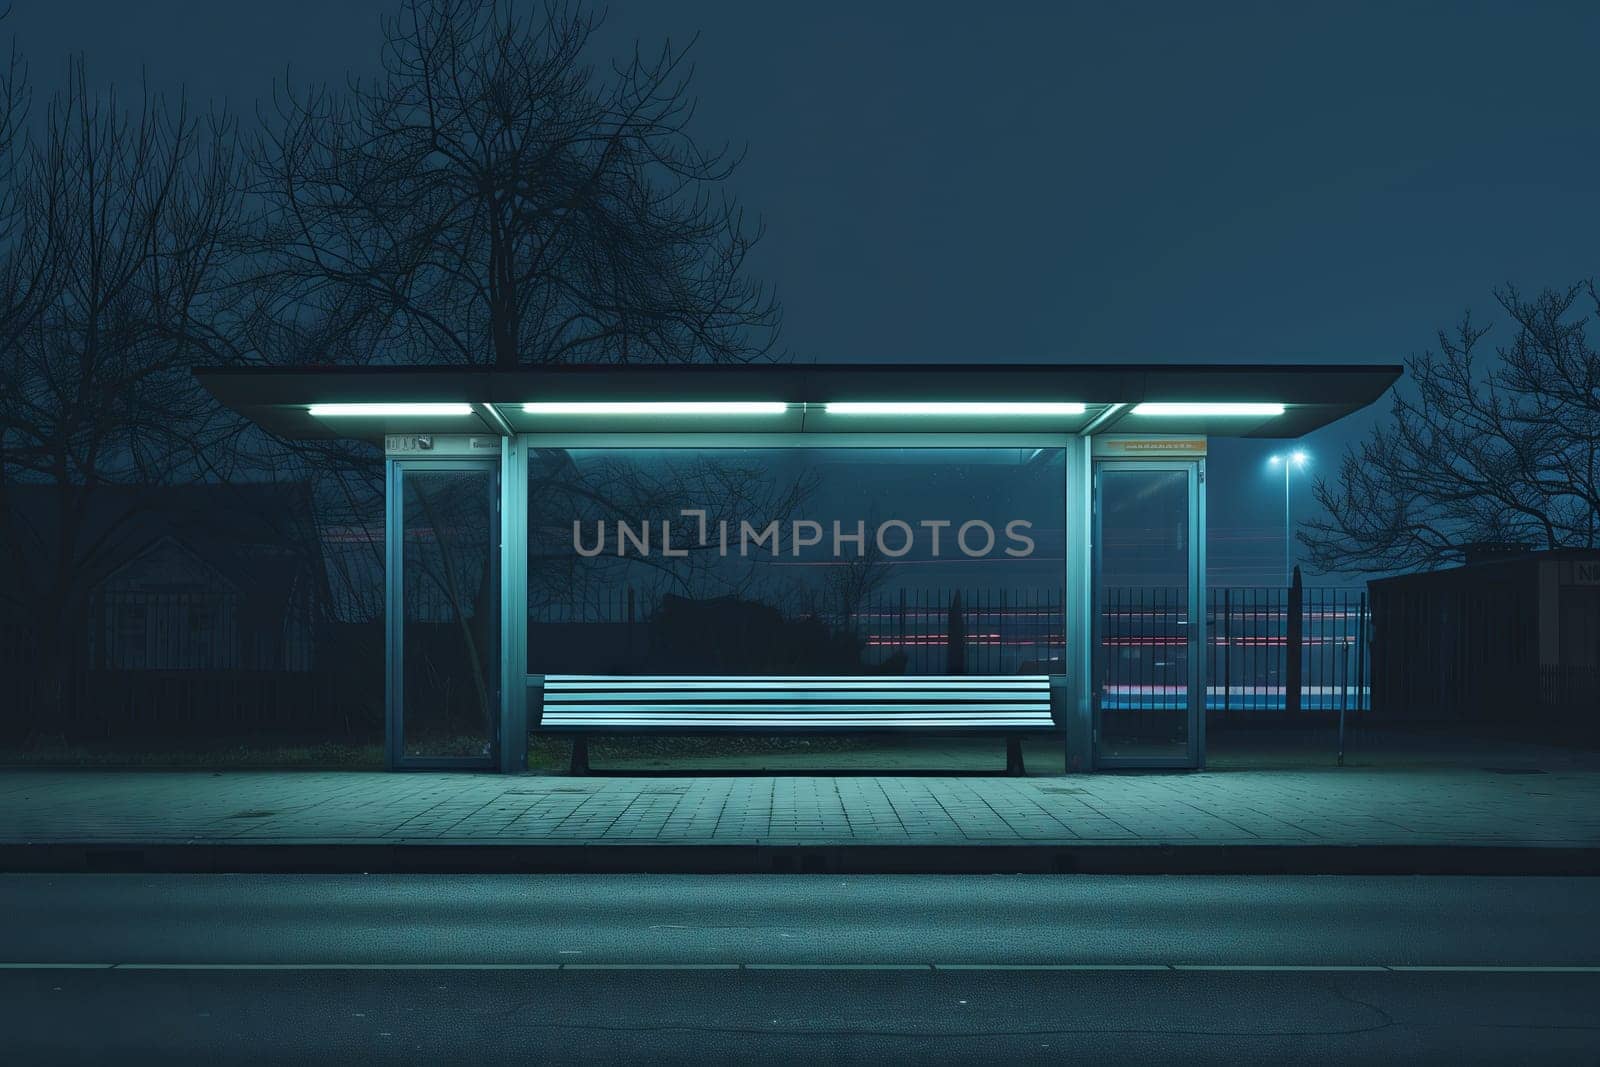 A rectangular glass bus stop with a bench sits empty at night, illuminated by automotive lighting. A lone tree provides shade as darkness falls